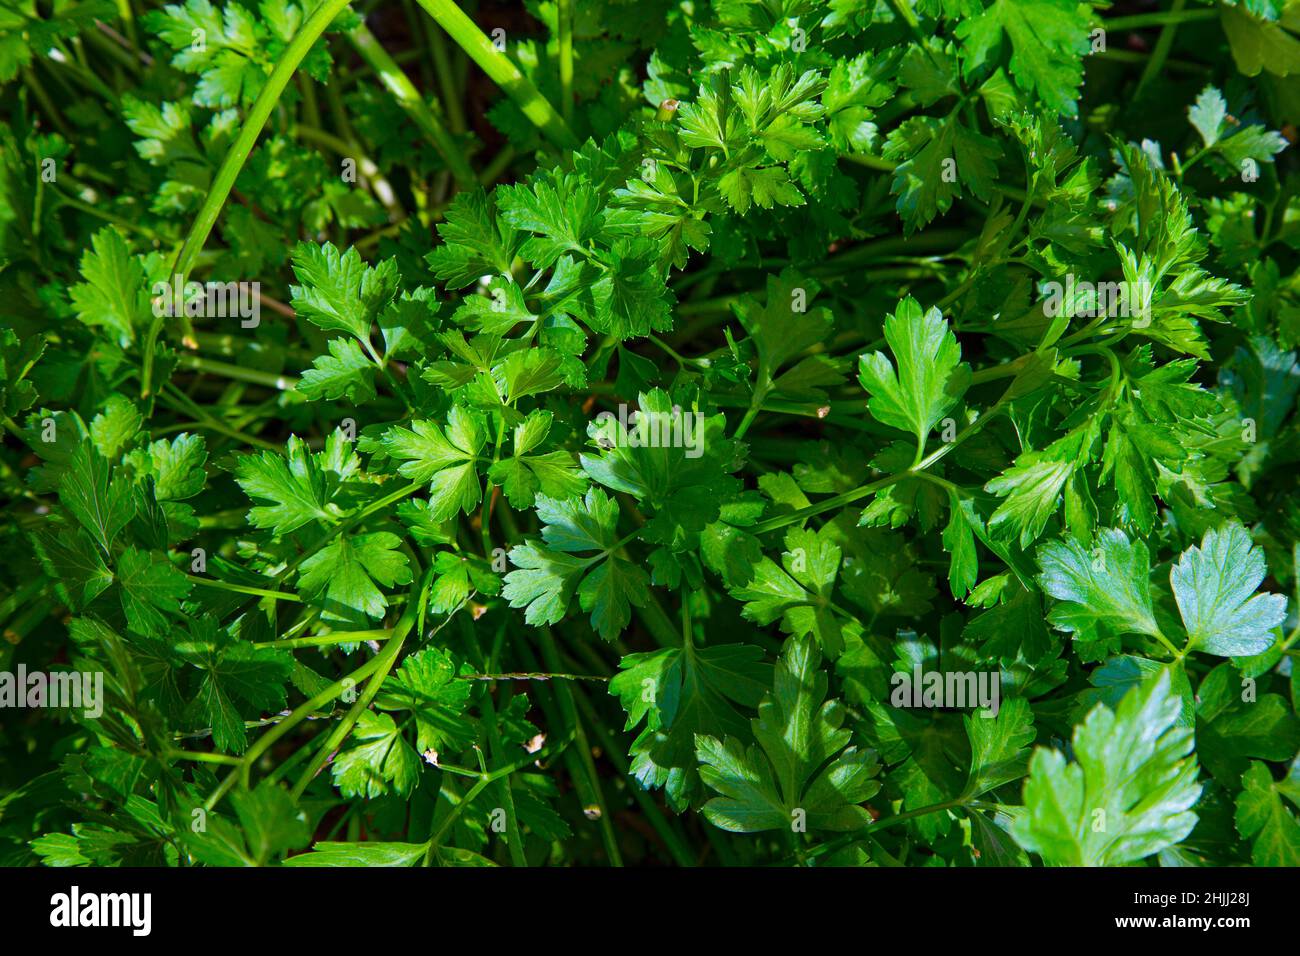 Flatleaf Parsley food background, photographed in a herb garden Stock Photo